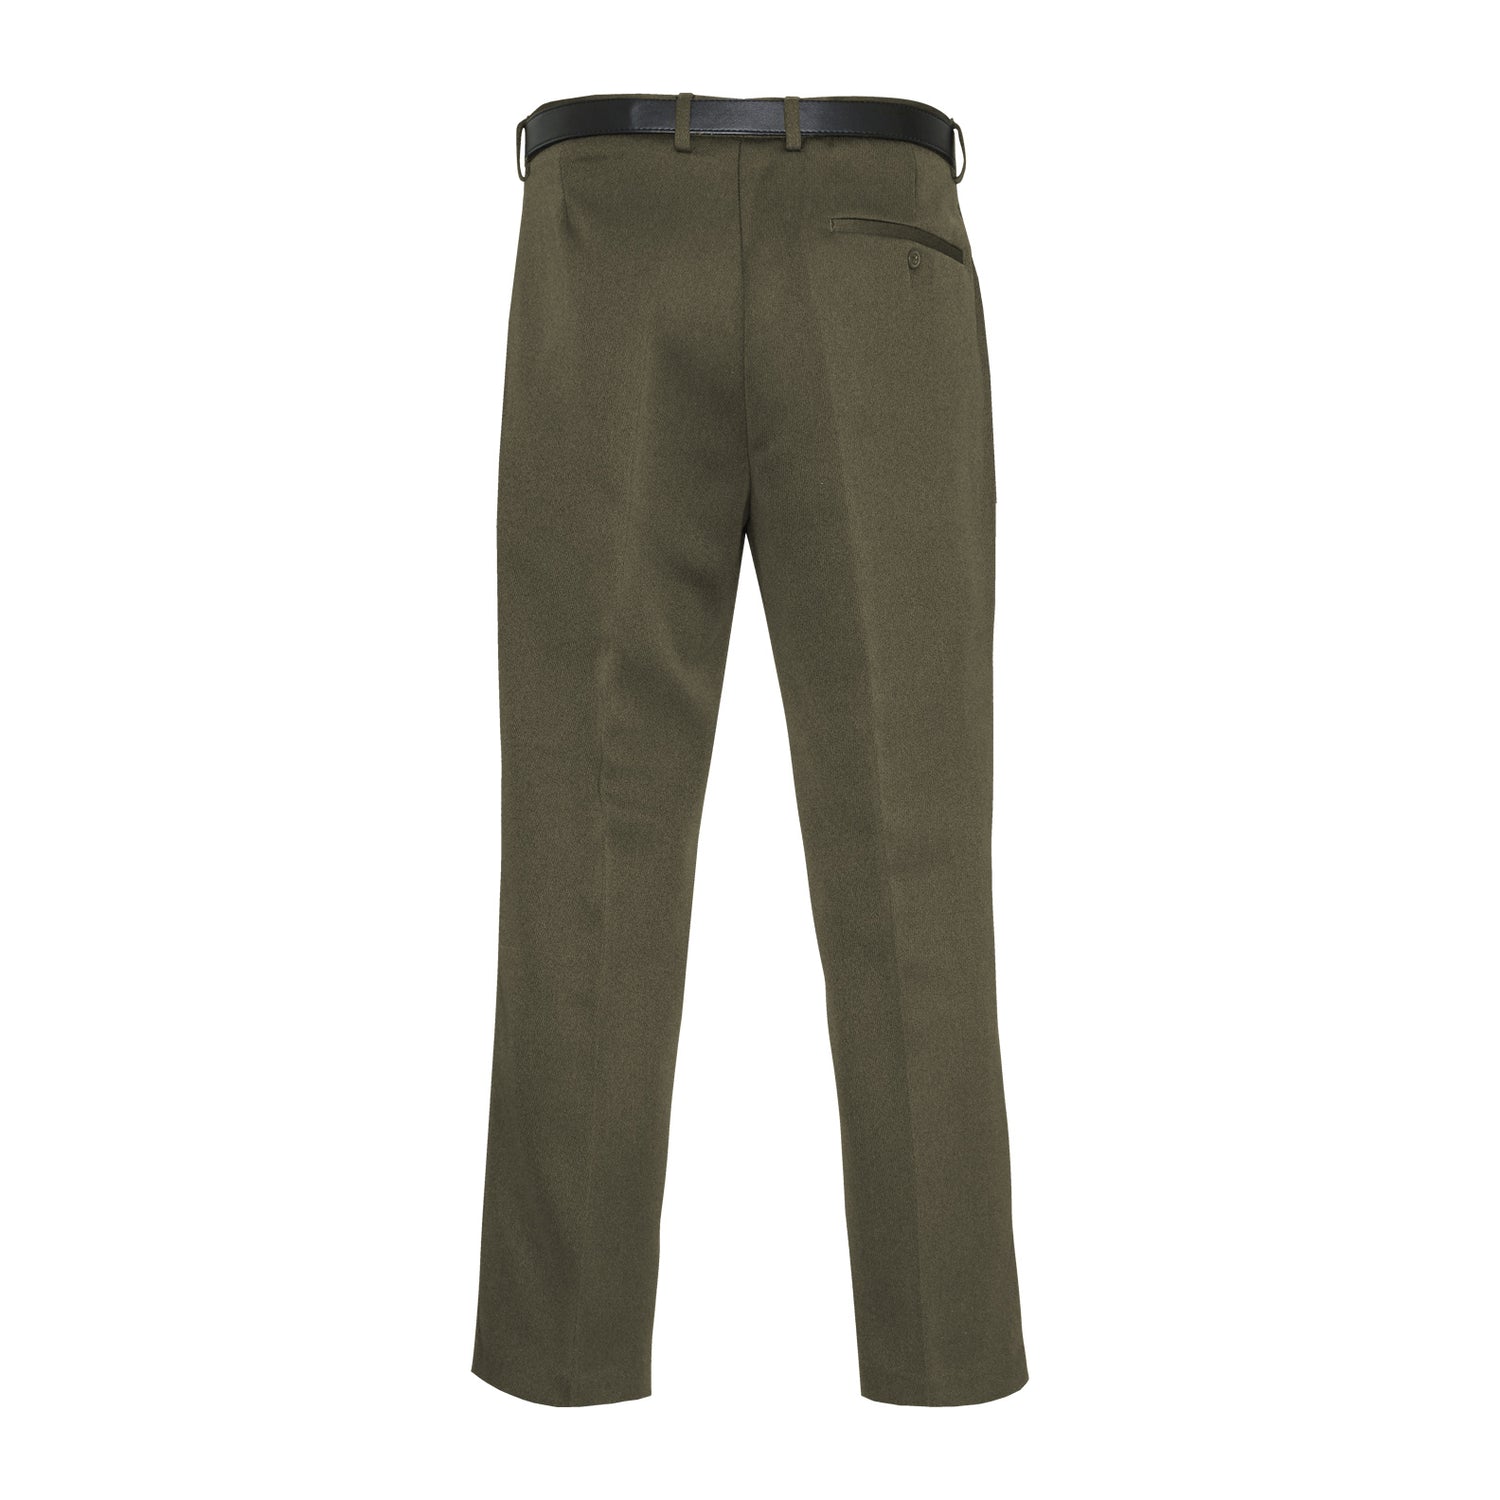 Cavalry Twill Trouser  Fantastic Quality, Smart Trousers From New